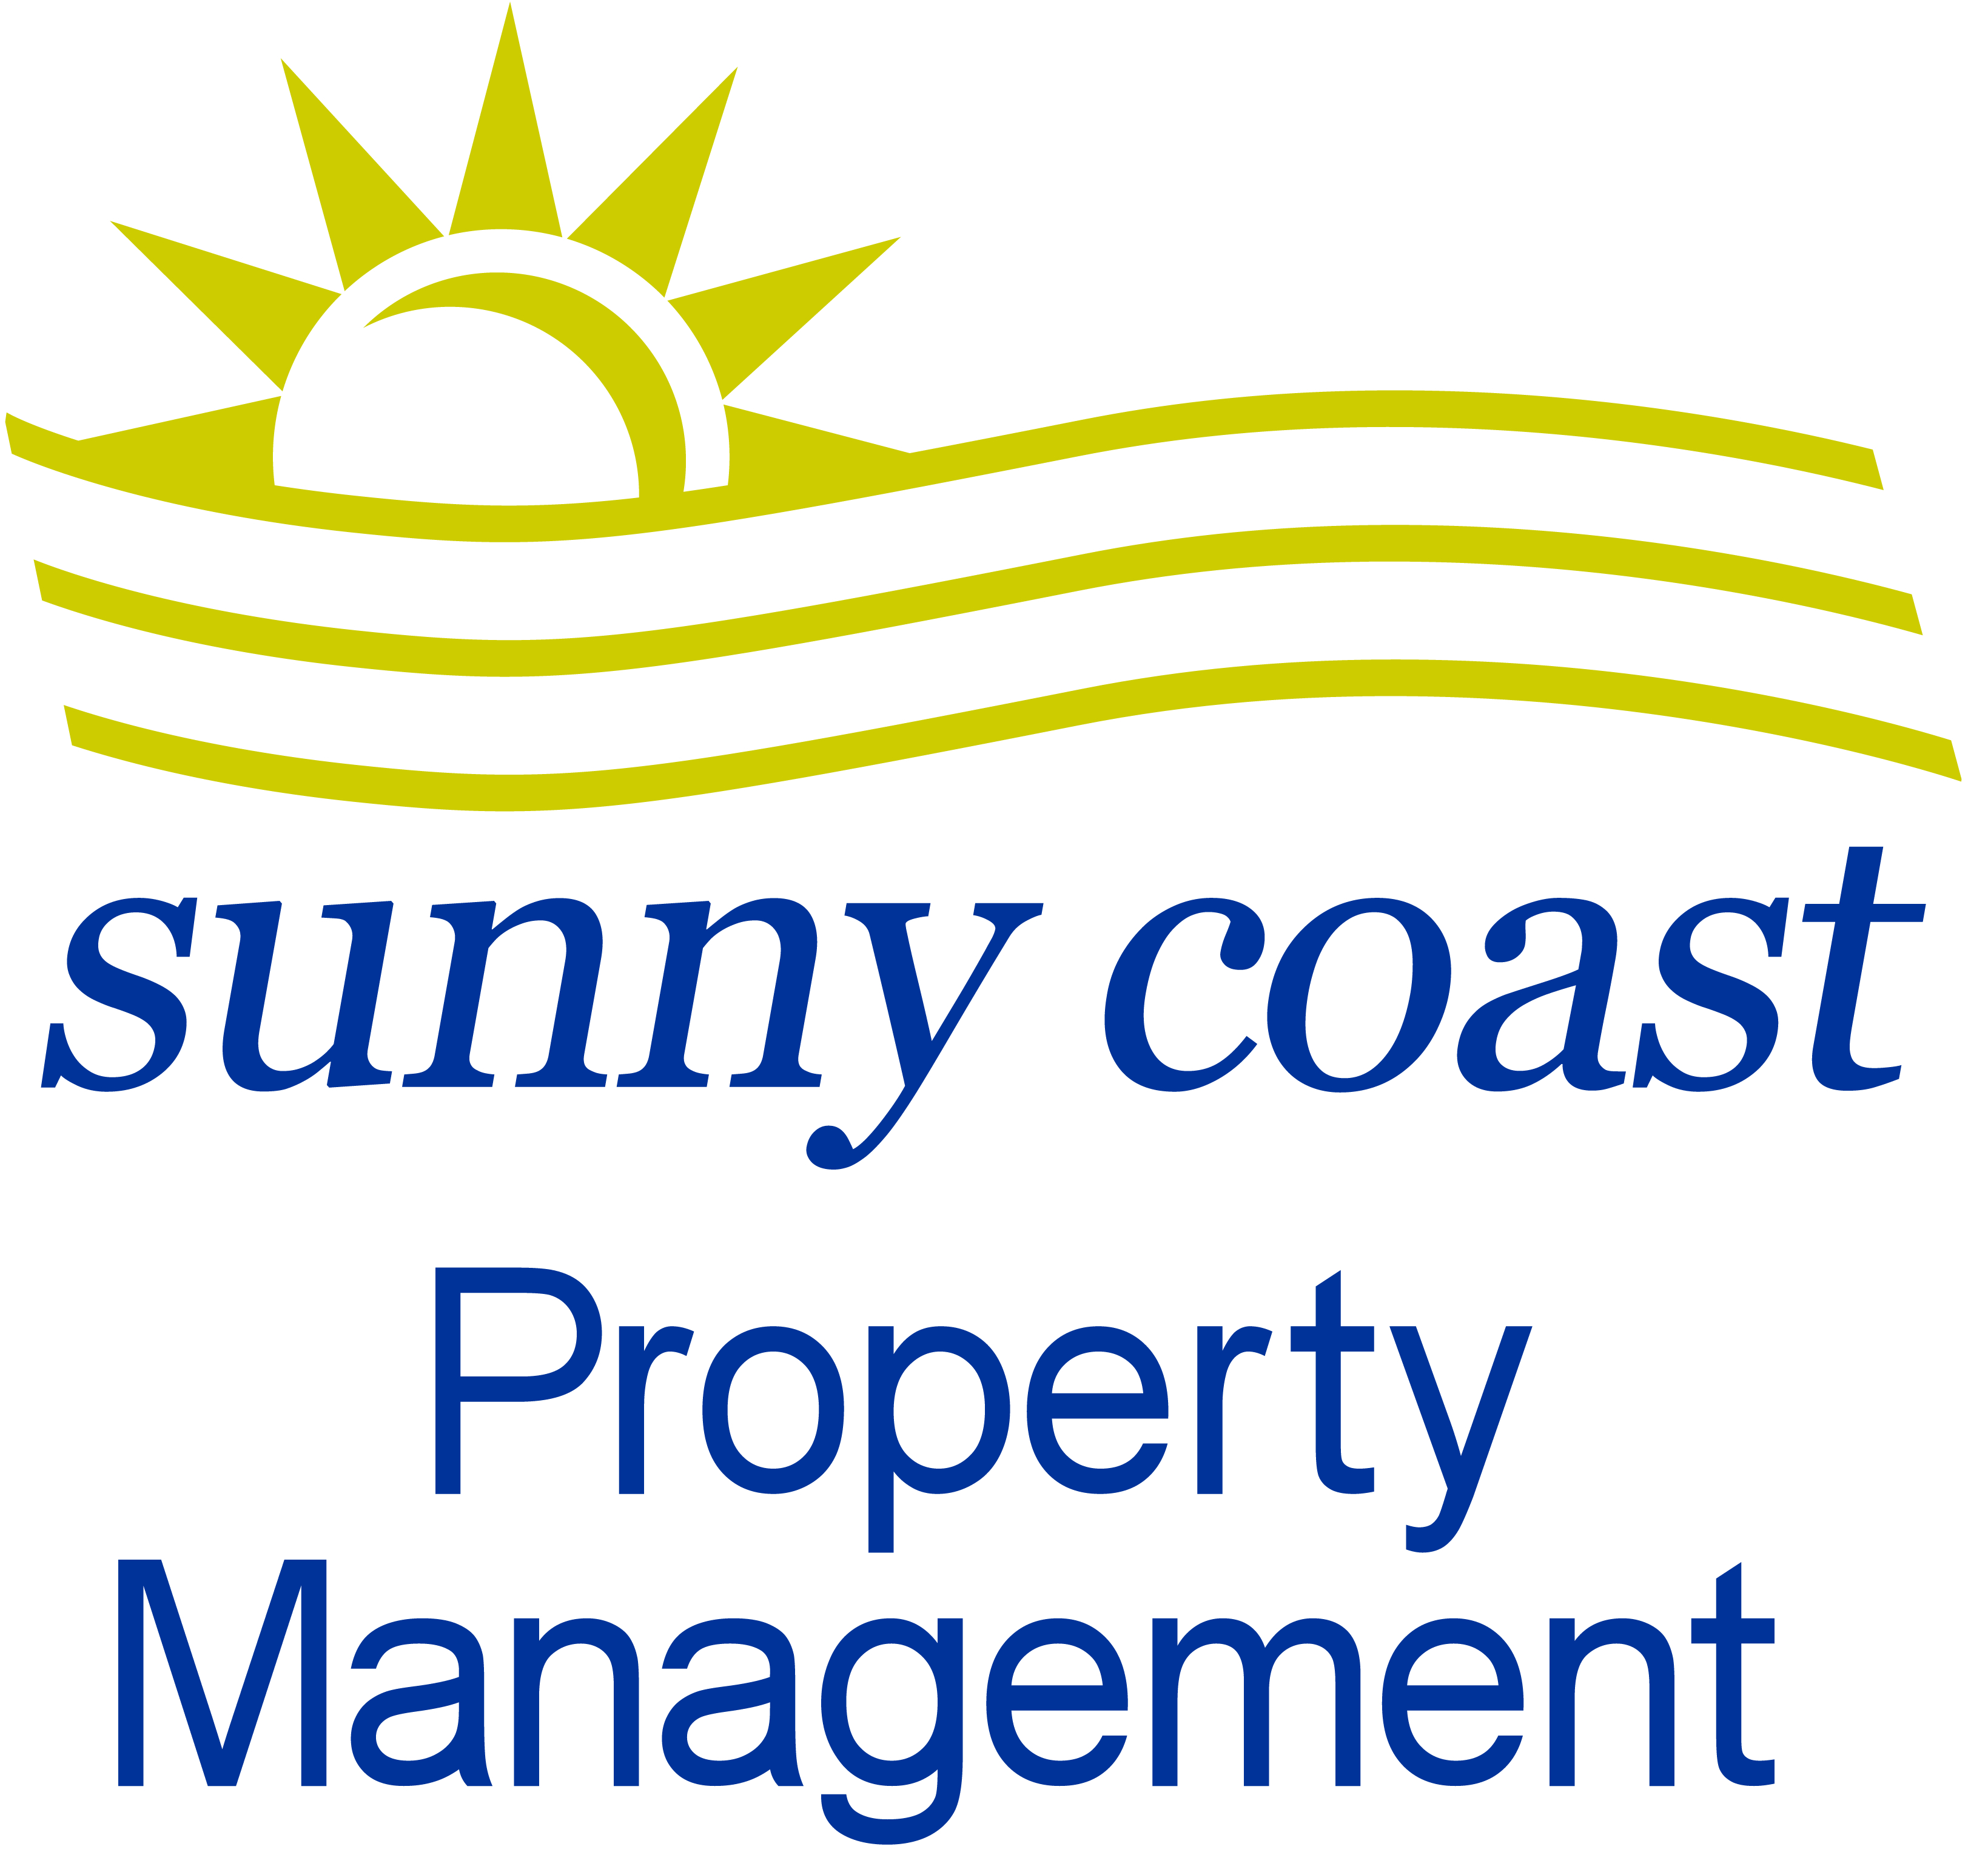 Sunny Coast Property Management in San Diego